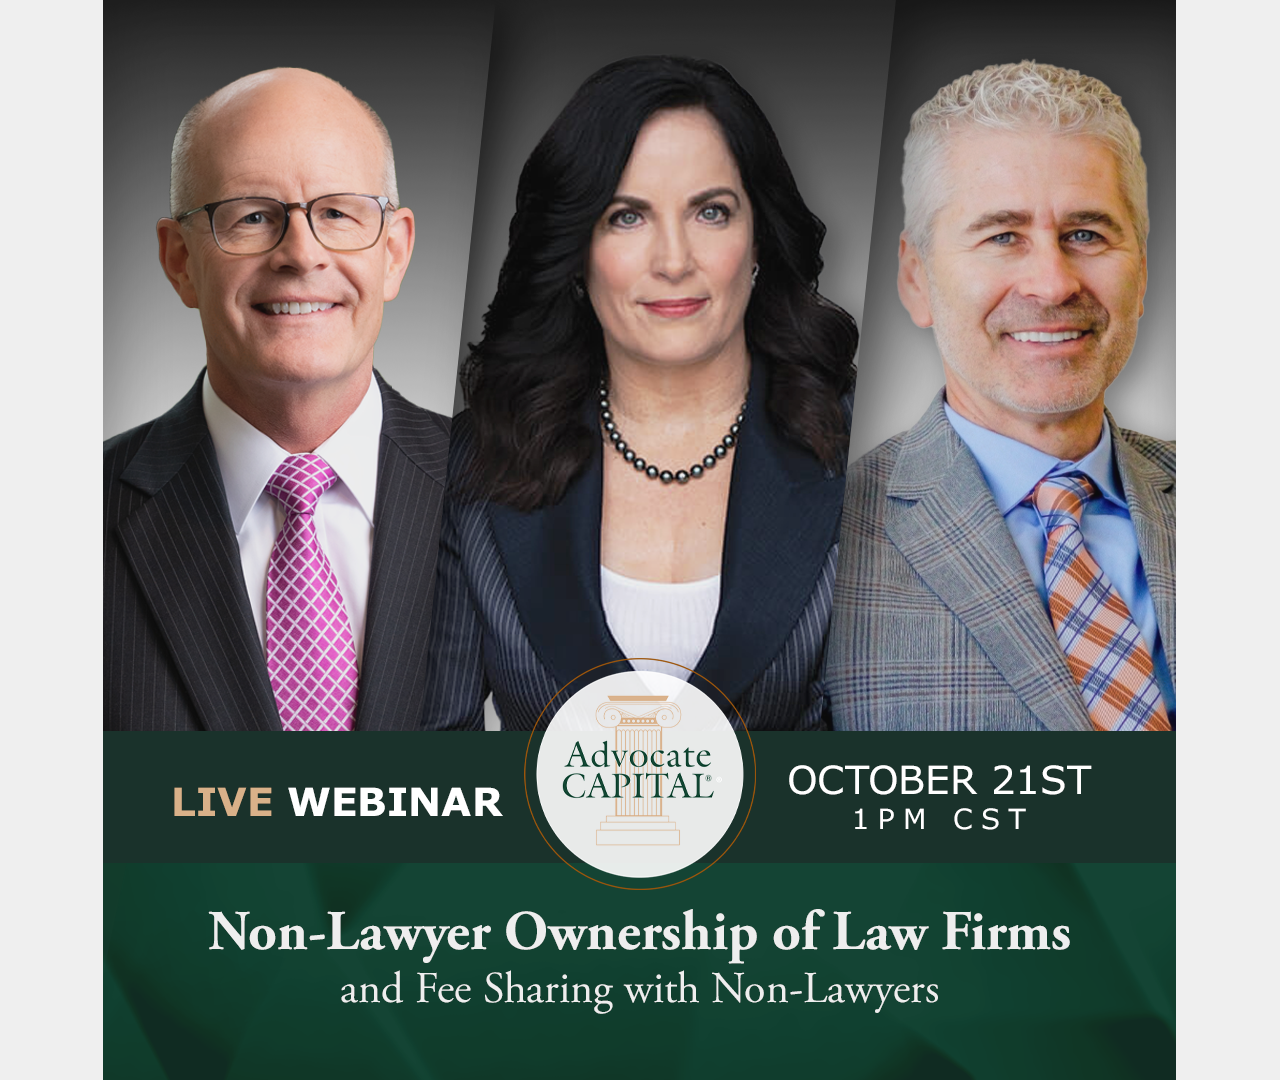 Non-Lawyer Ownership of Law Firms and Fee-Sharing with Non-Lawyers 